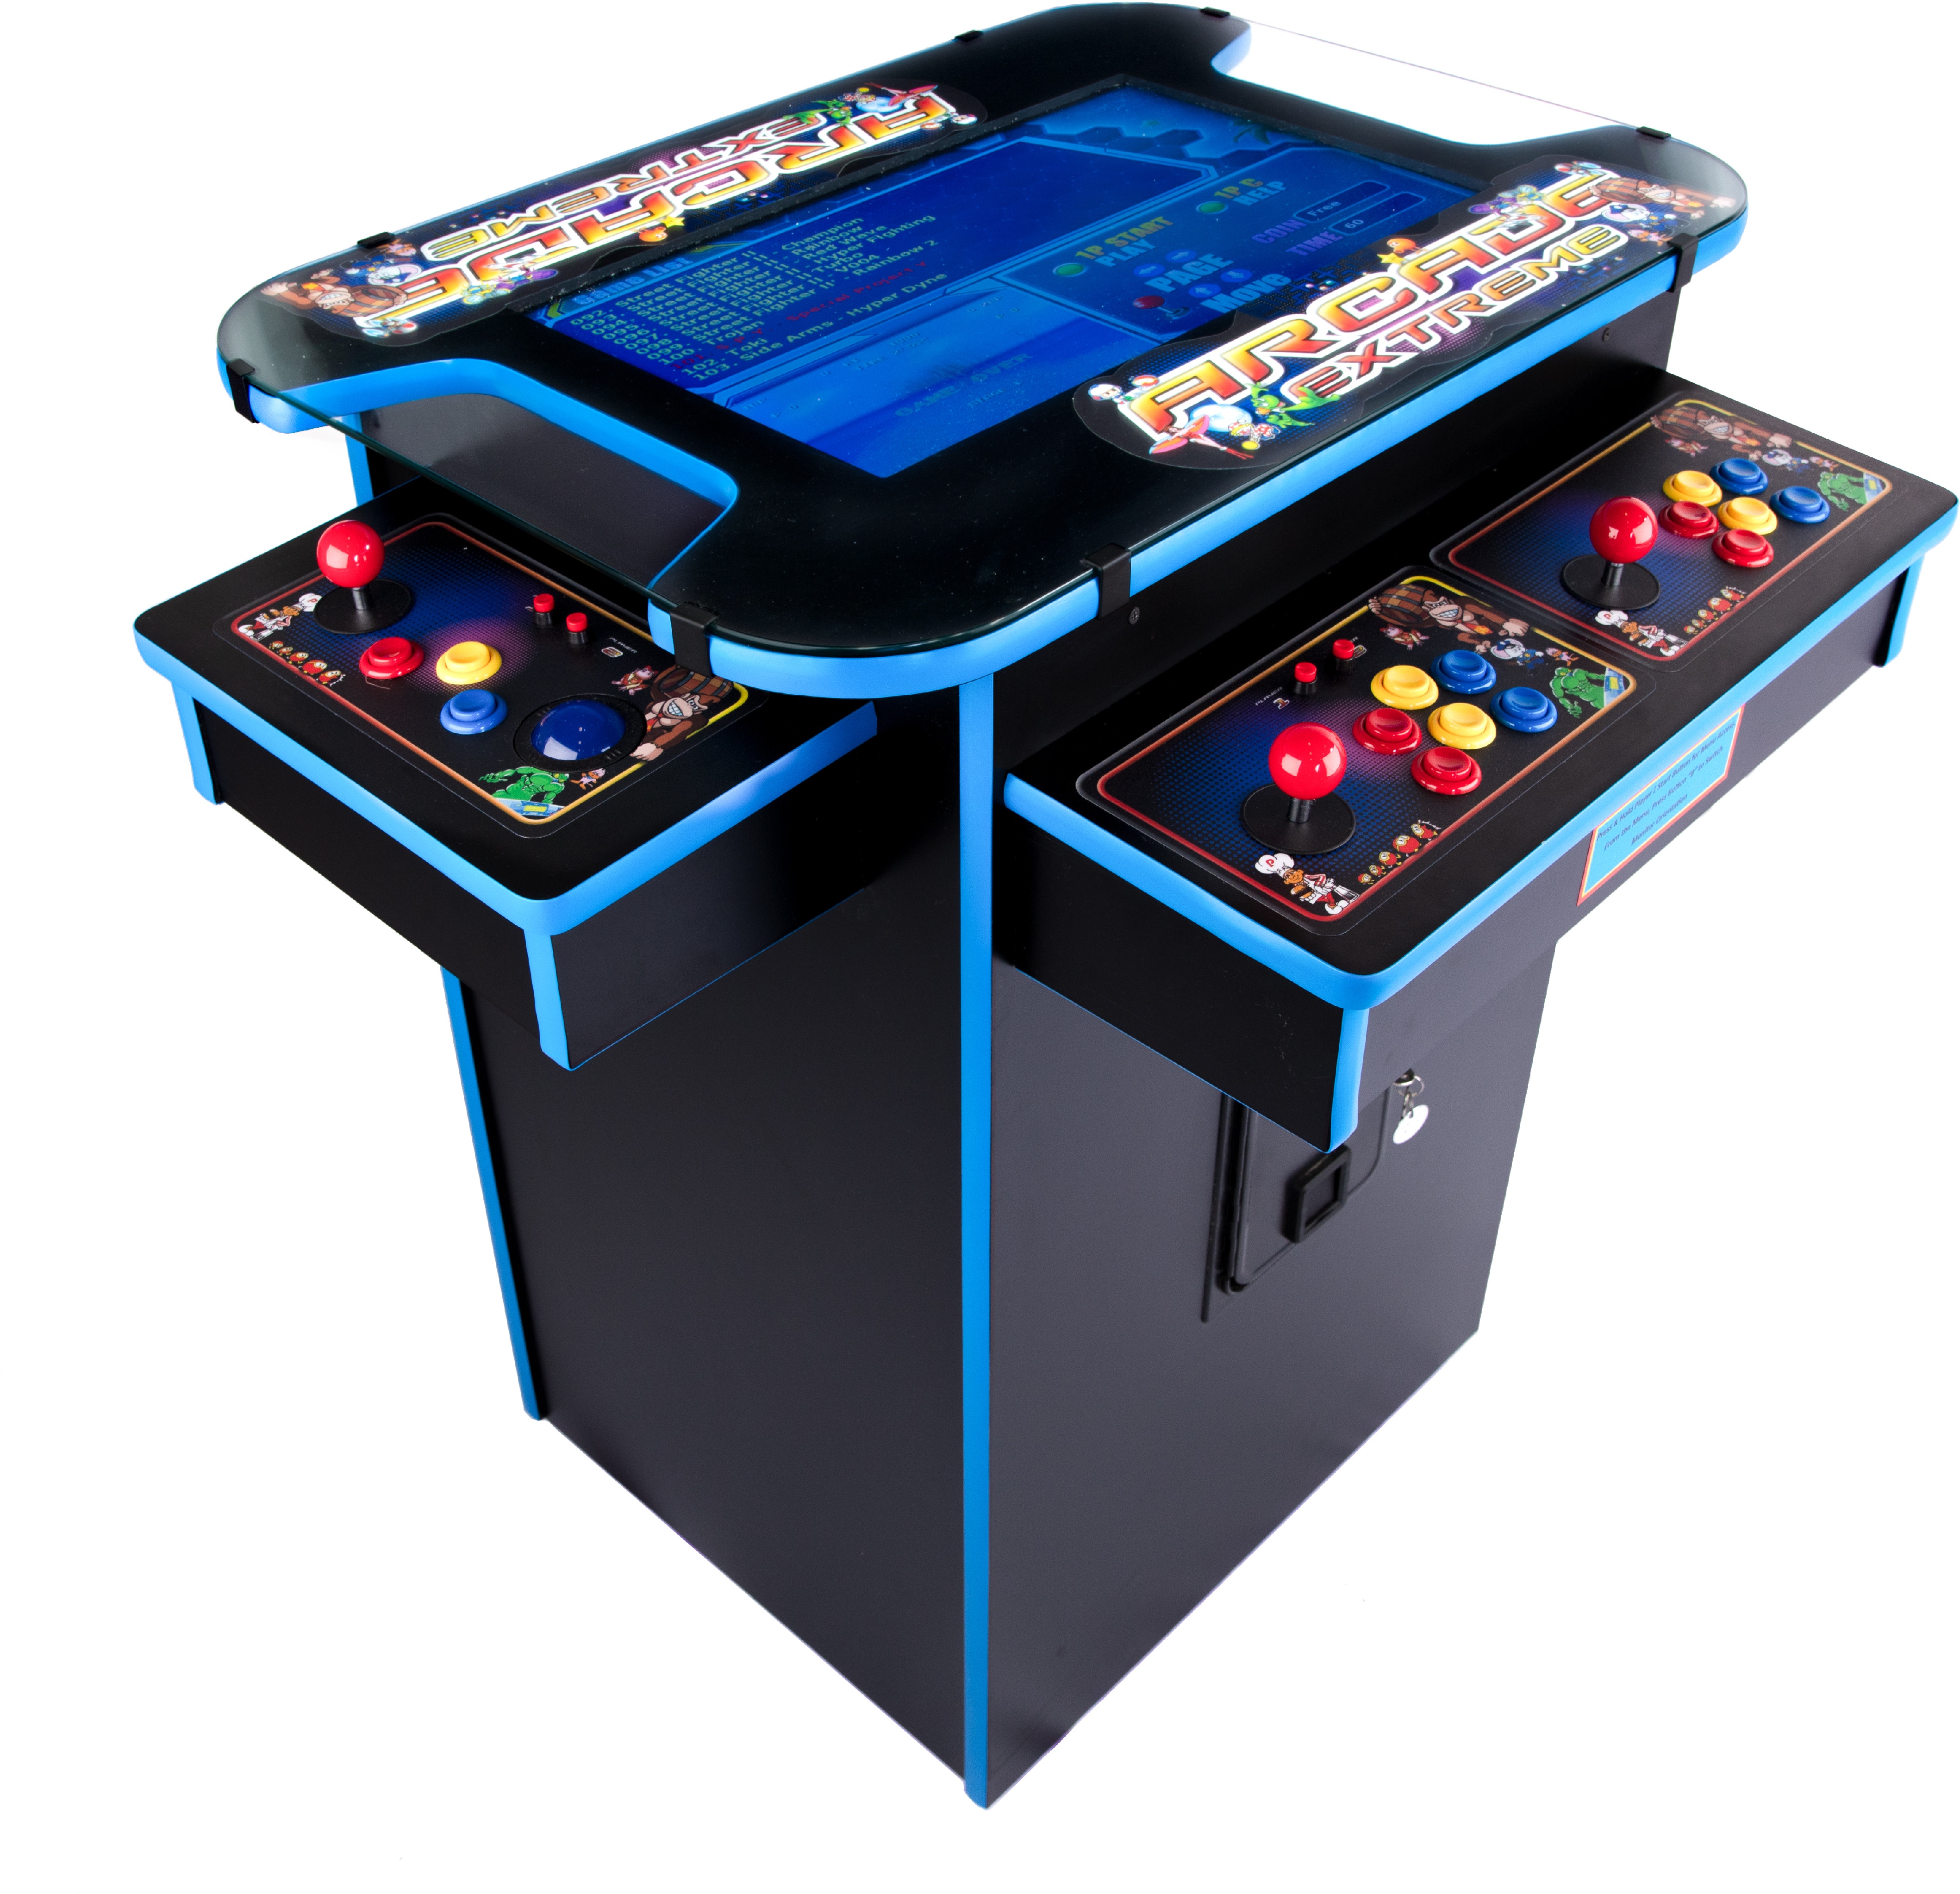 Amini\'s Family Games Arcade Bar Style Cocktail and Room Game 1 in Arcade 1100 Classic Extreme